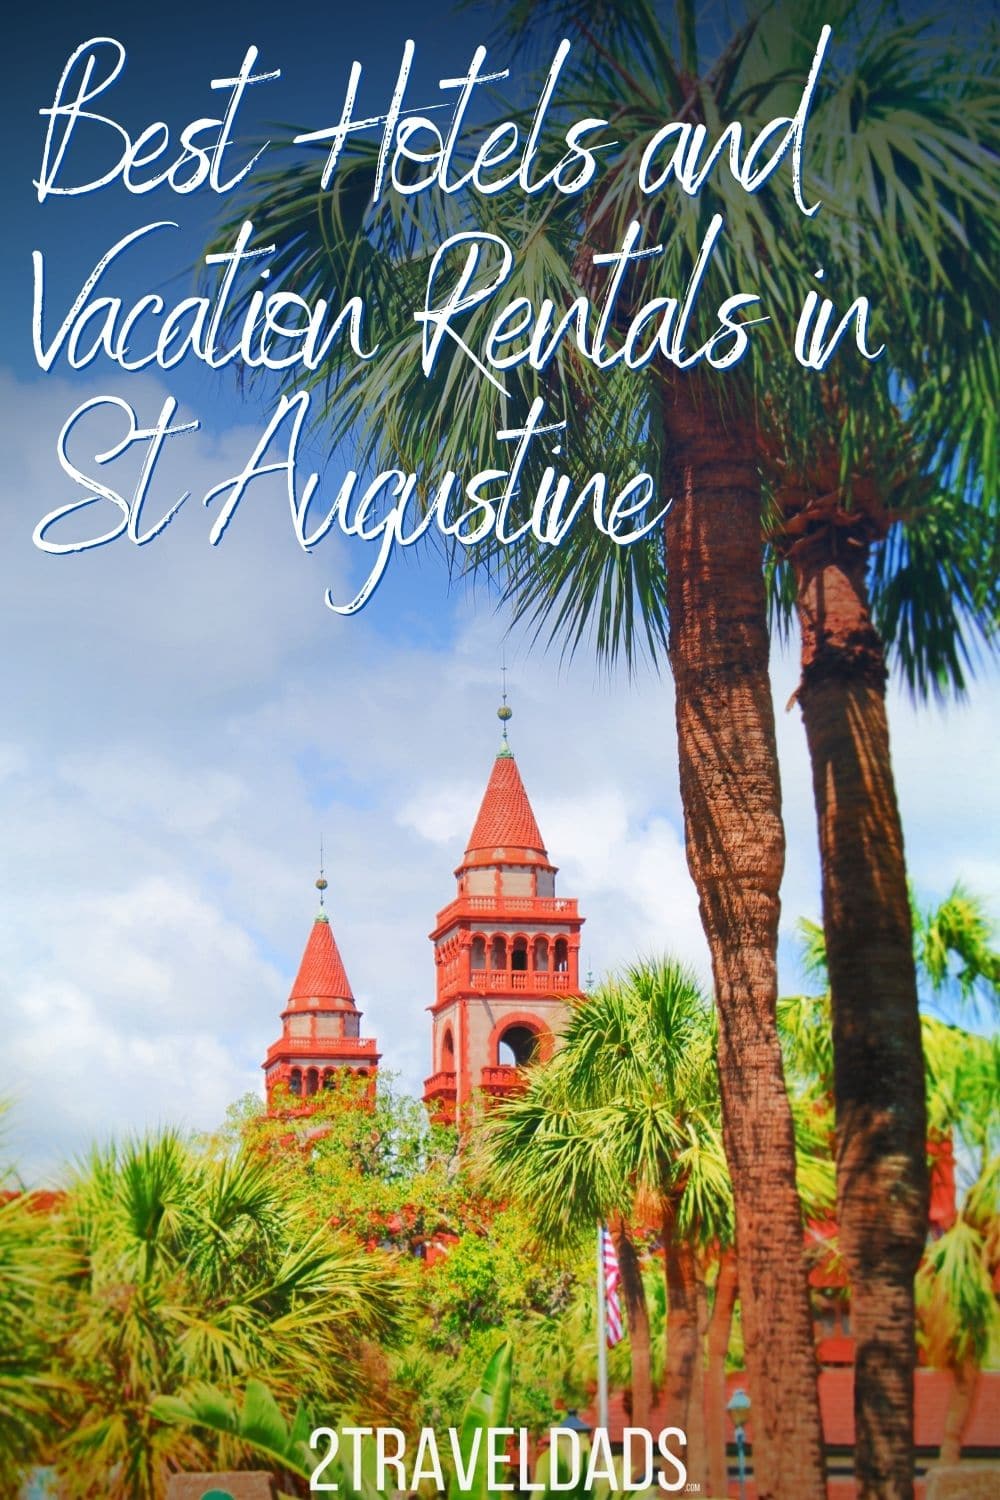 Top picks for hotels, interesting inns, vacation rentals and more in St Augustine. Bed and Breakfasts in the historic downtown or beach bungalows off the beaten path, family friendly or romantic getaway options in North Florida.